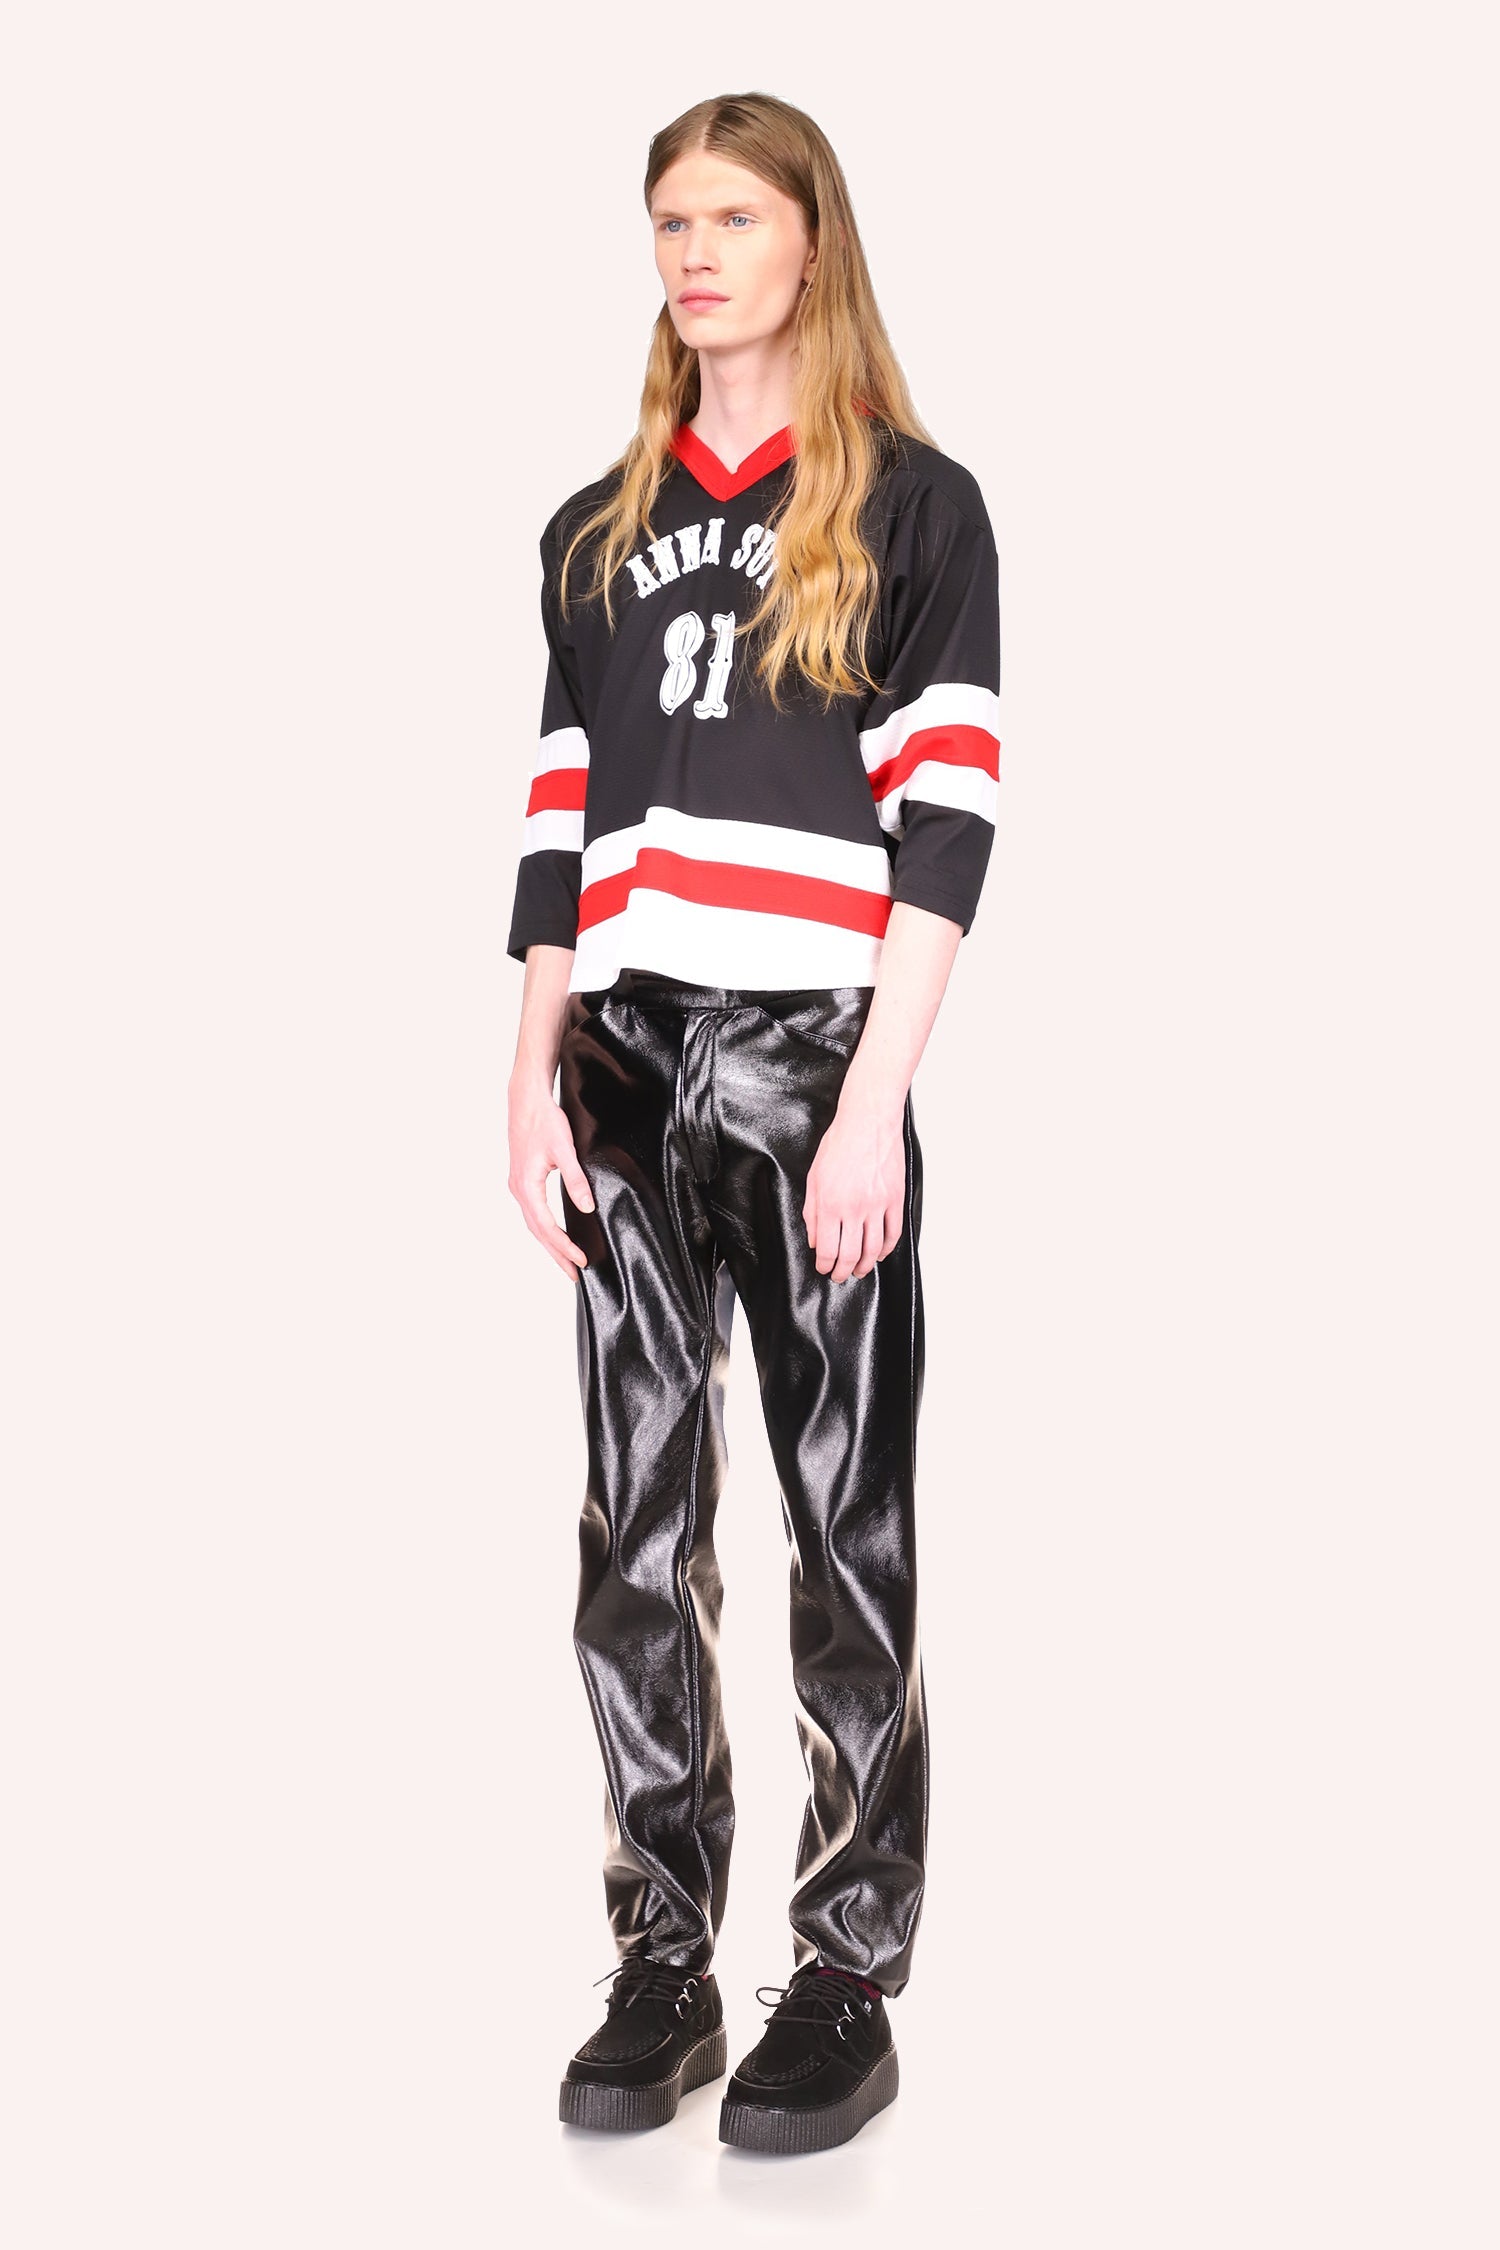 Jersey, mid arms sleeves, red v-collar, black on top, Anna Sui and 81 in white, stripes of white-red-white